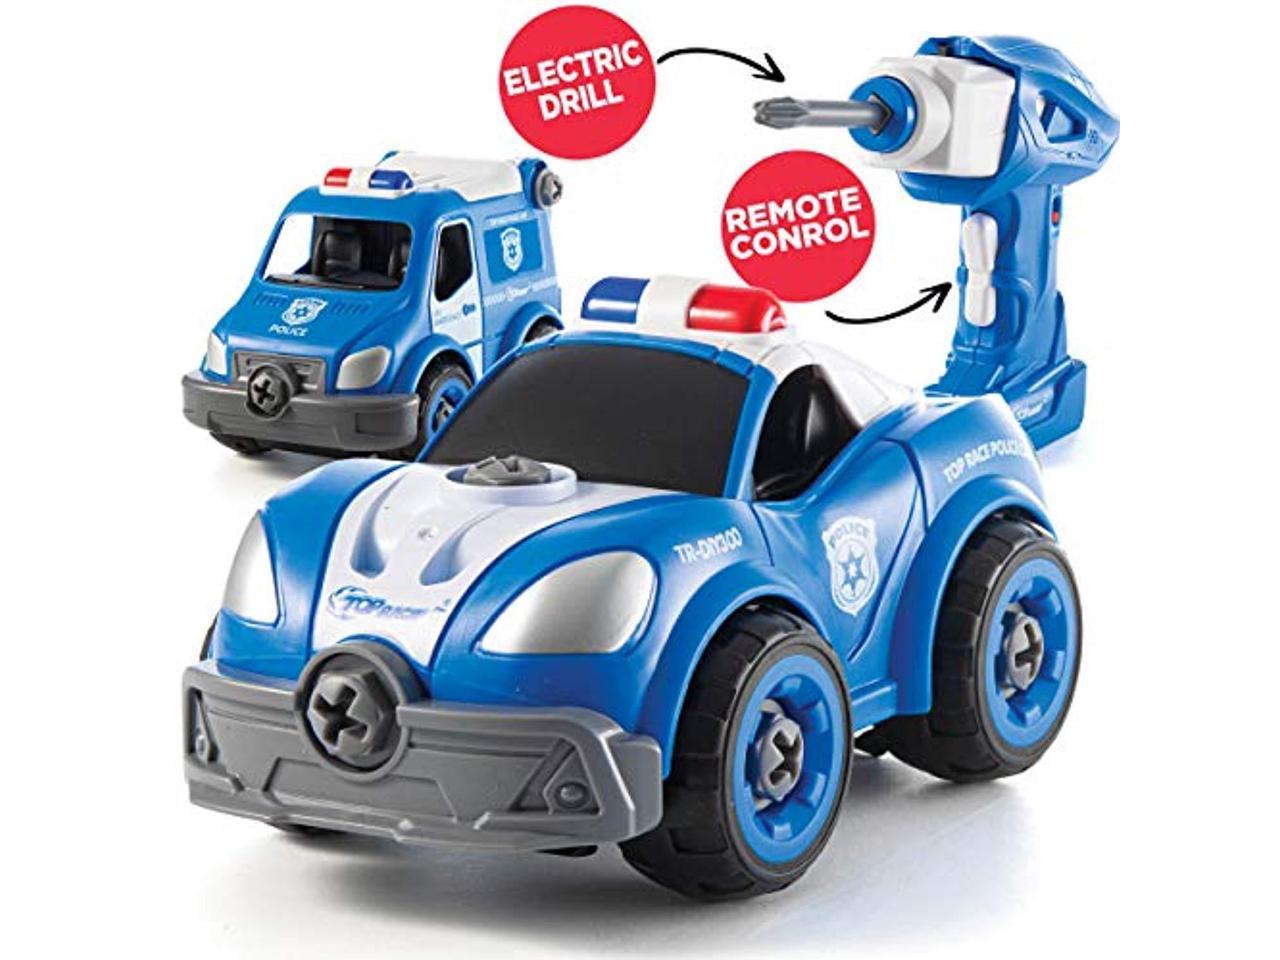 Gift Toys for Boys 3,4,5,6,7 Year Olds Kids Stem Building Toy Take Apart Toys with Electric Drill Converts to Fire Truck Remote Control Car 3 in one Take Apart Toy for Boys 